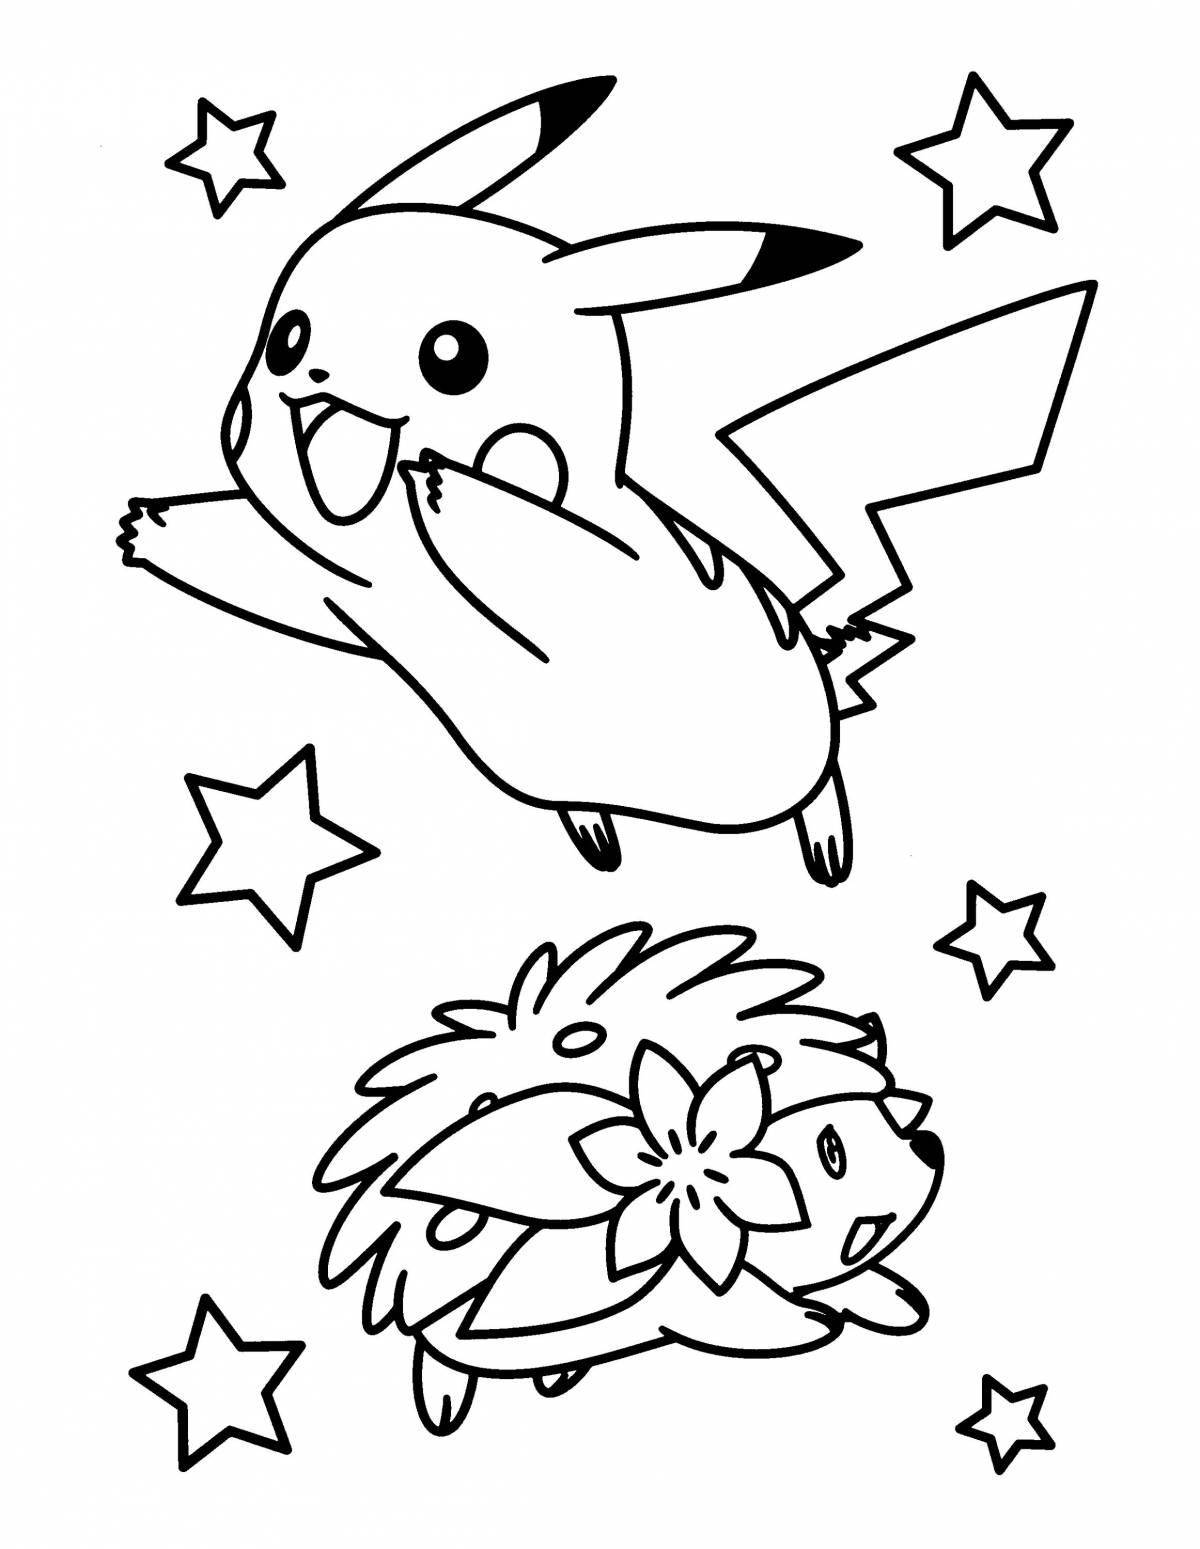 Pikachu colorful Christmas coloring book